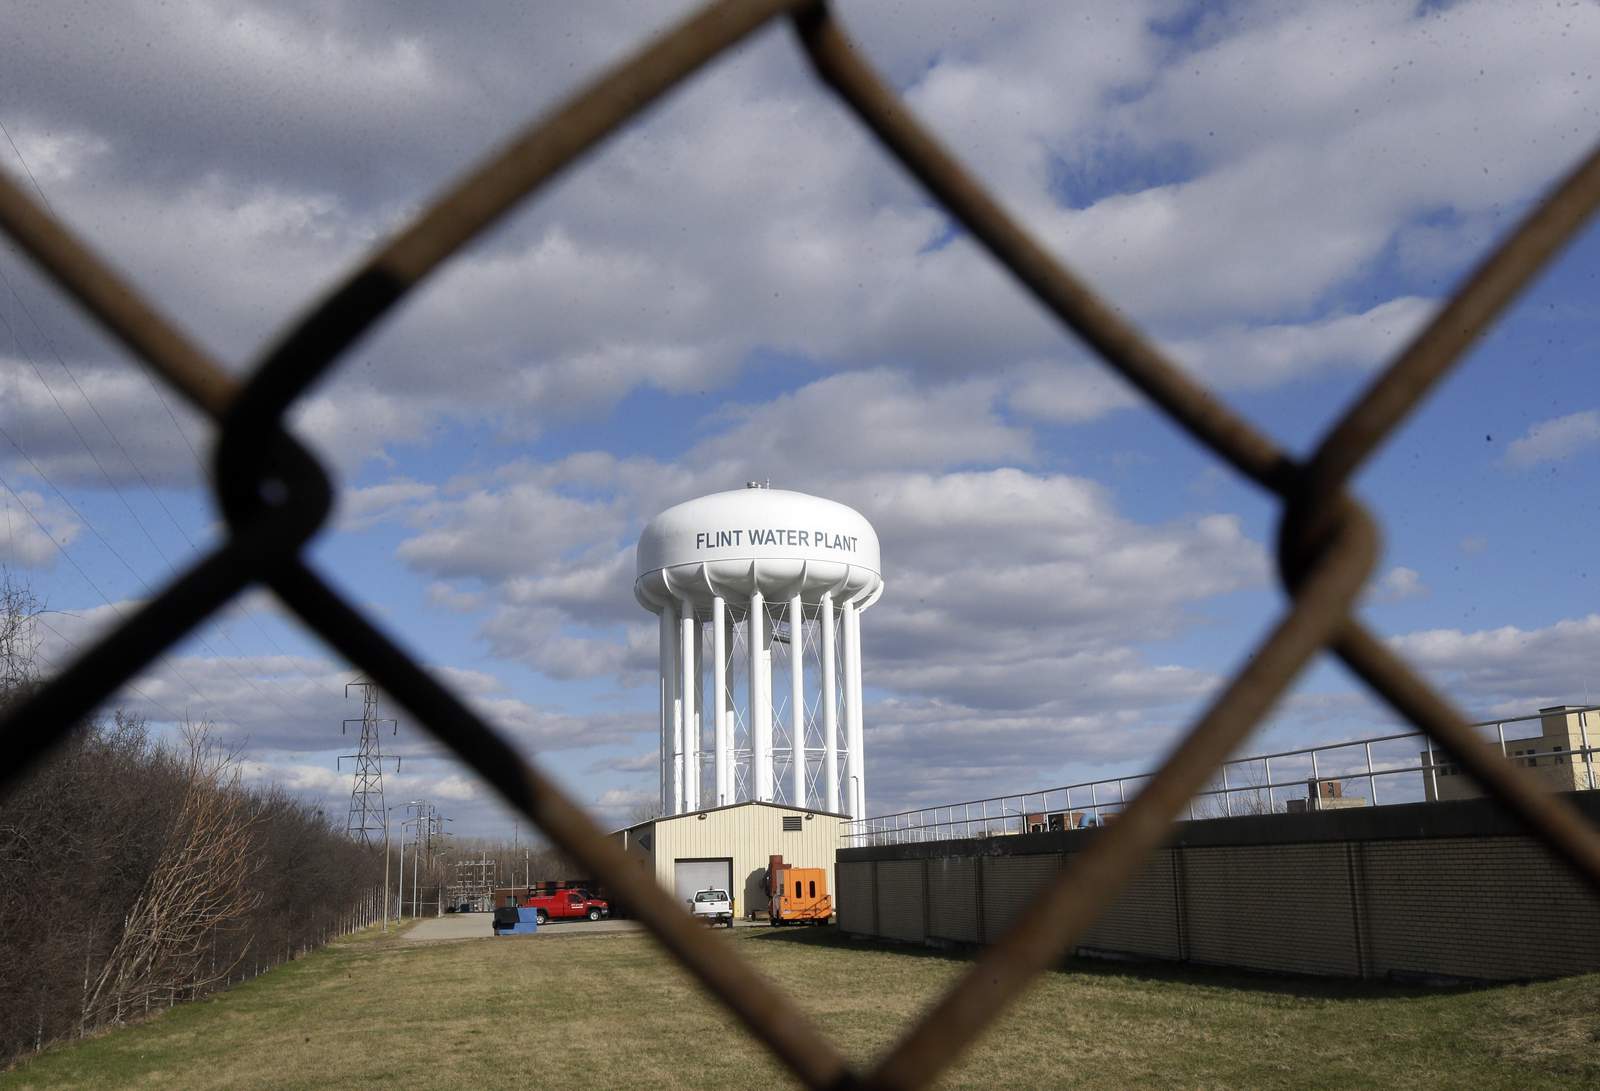 Flint joins $641M deal to settle lawsuits over lead in water